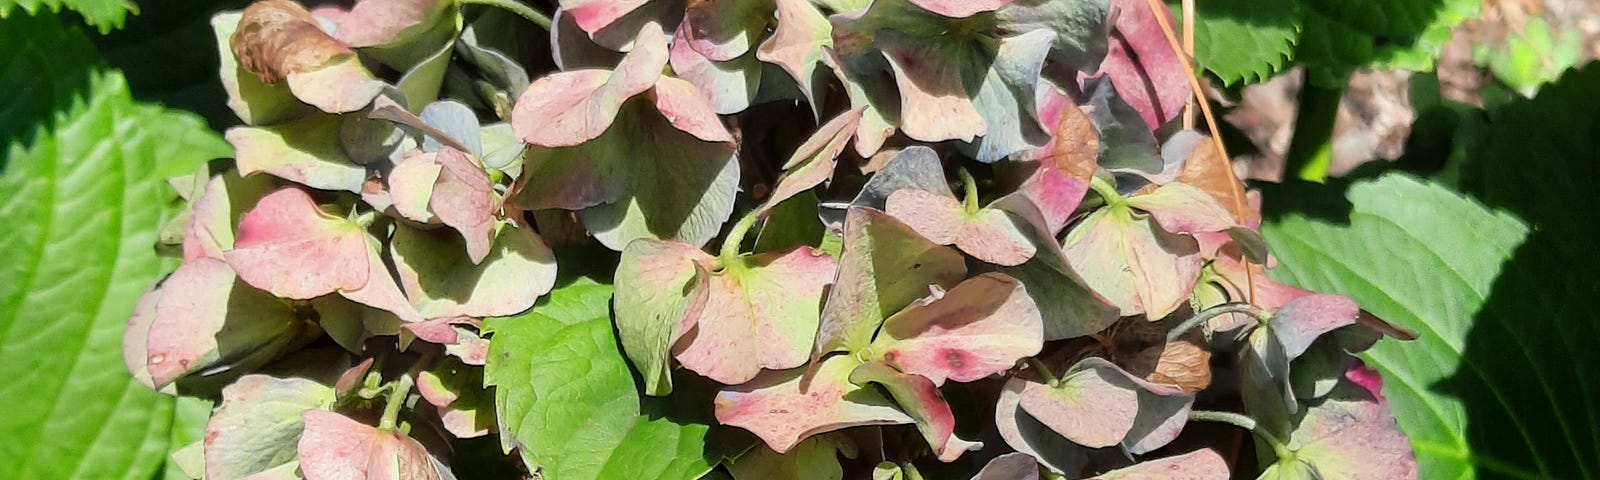 photo of fading hydrangea blooms and green leaves